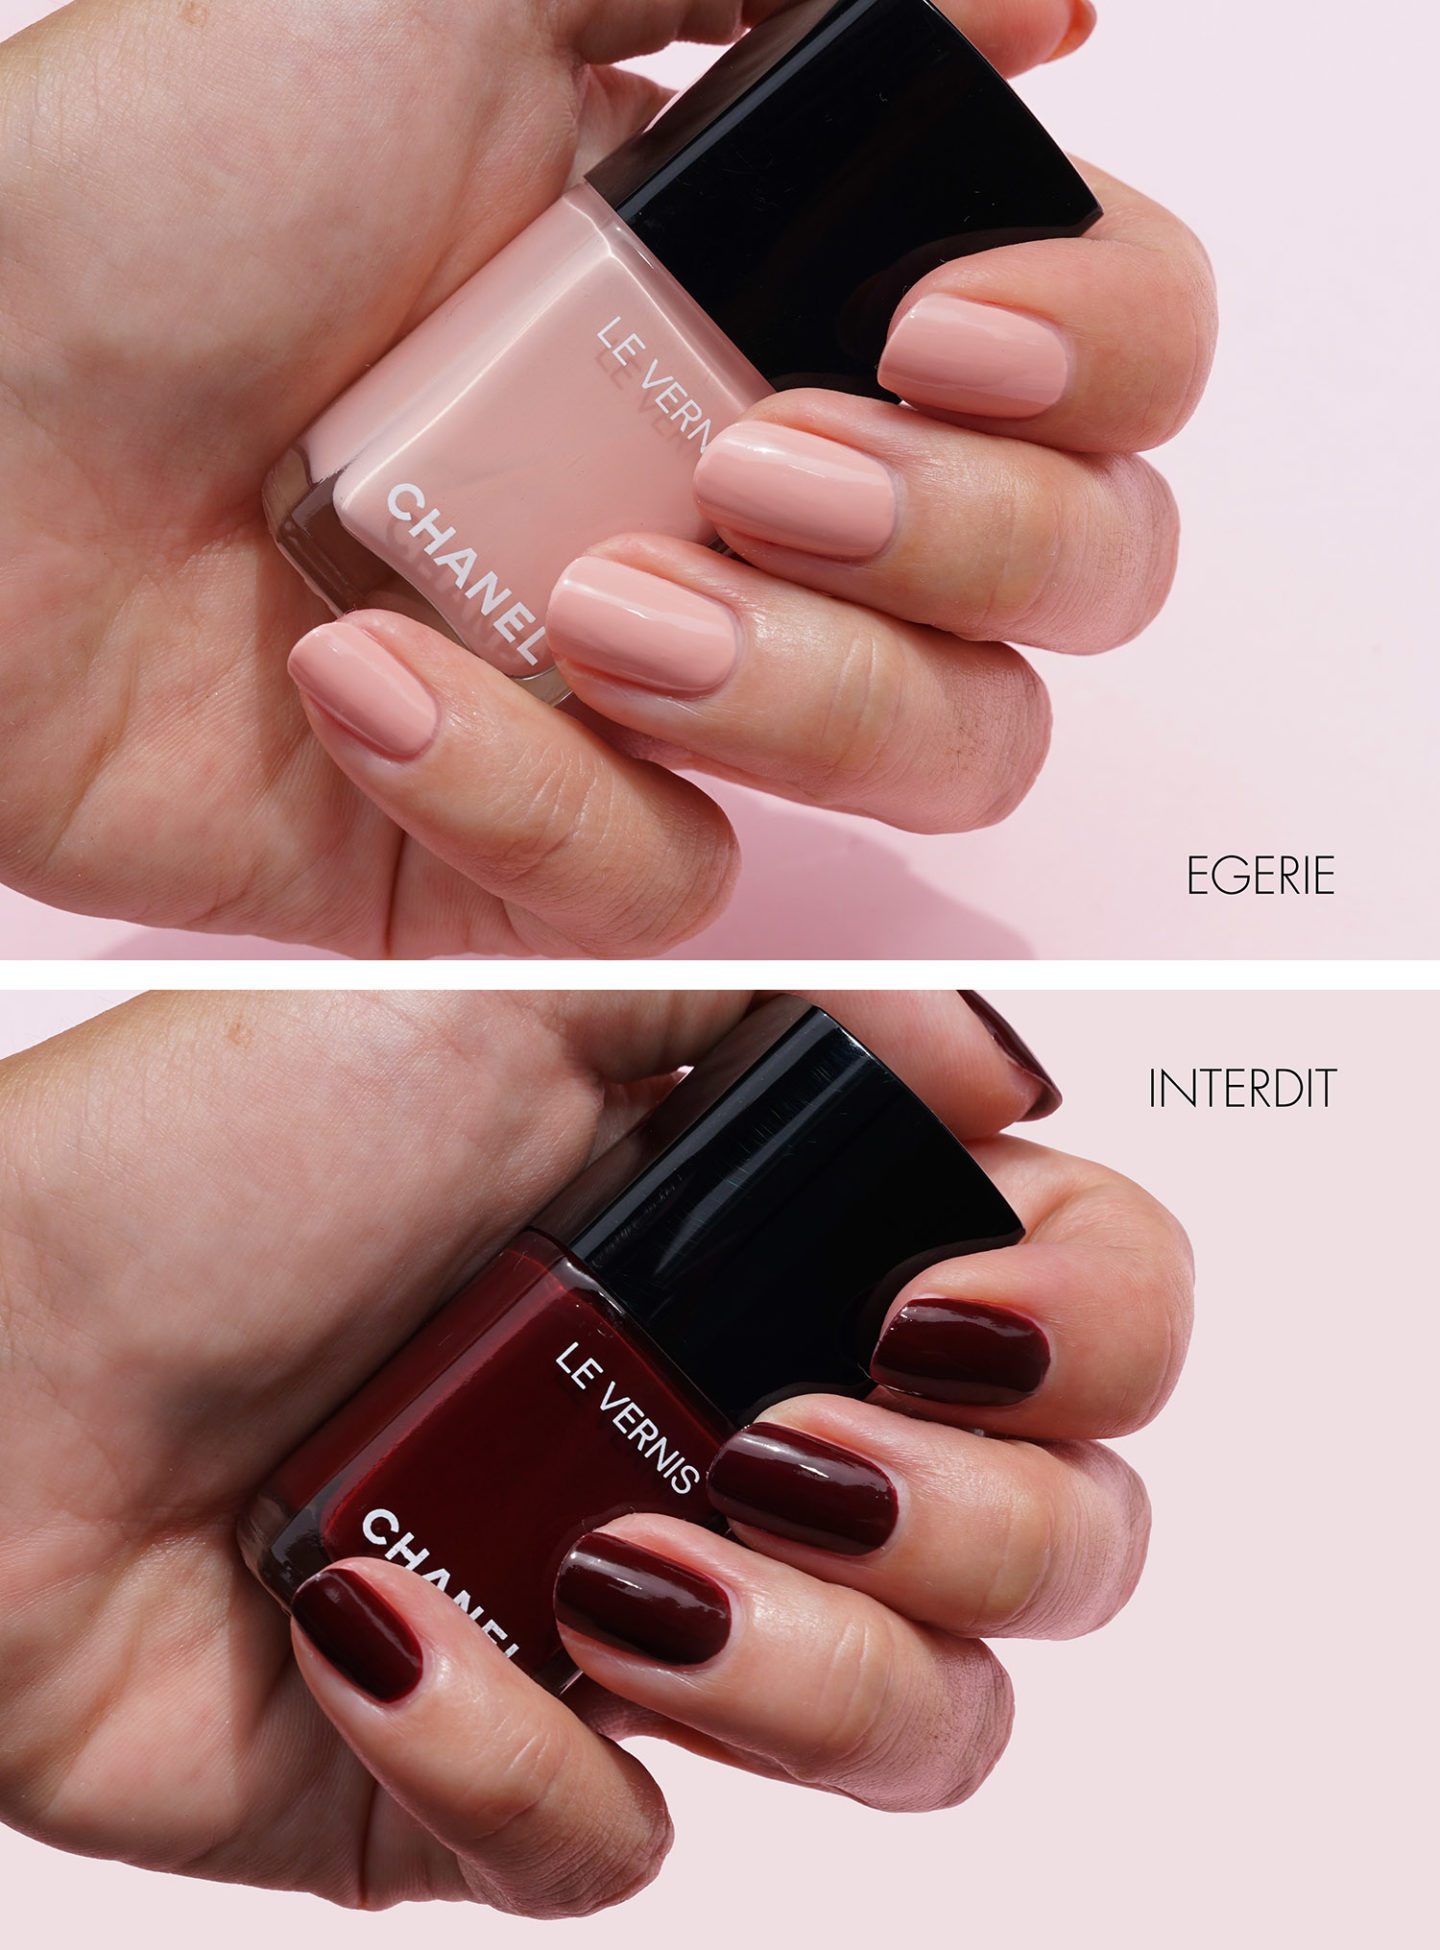 Chanel Fall 2020 Le Vernis Egerie and Interdit